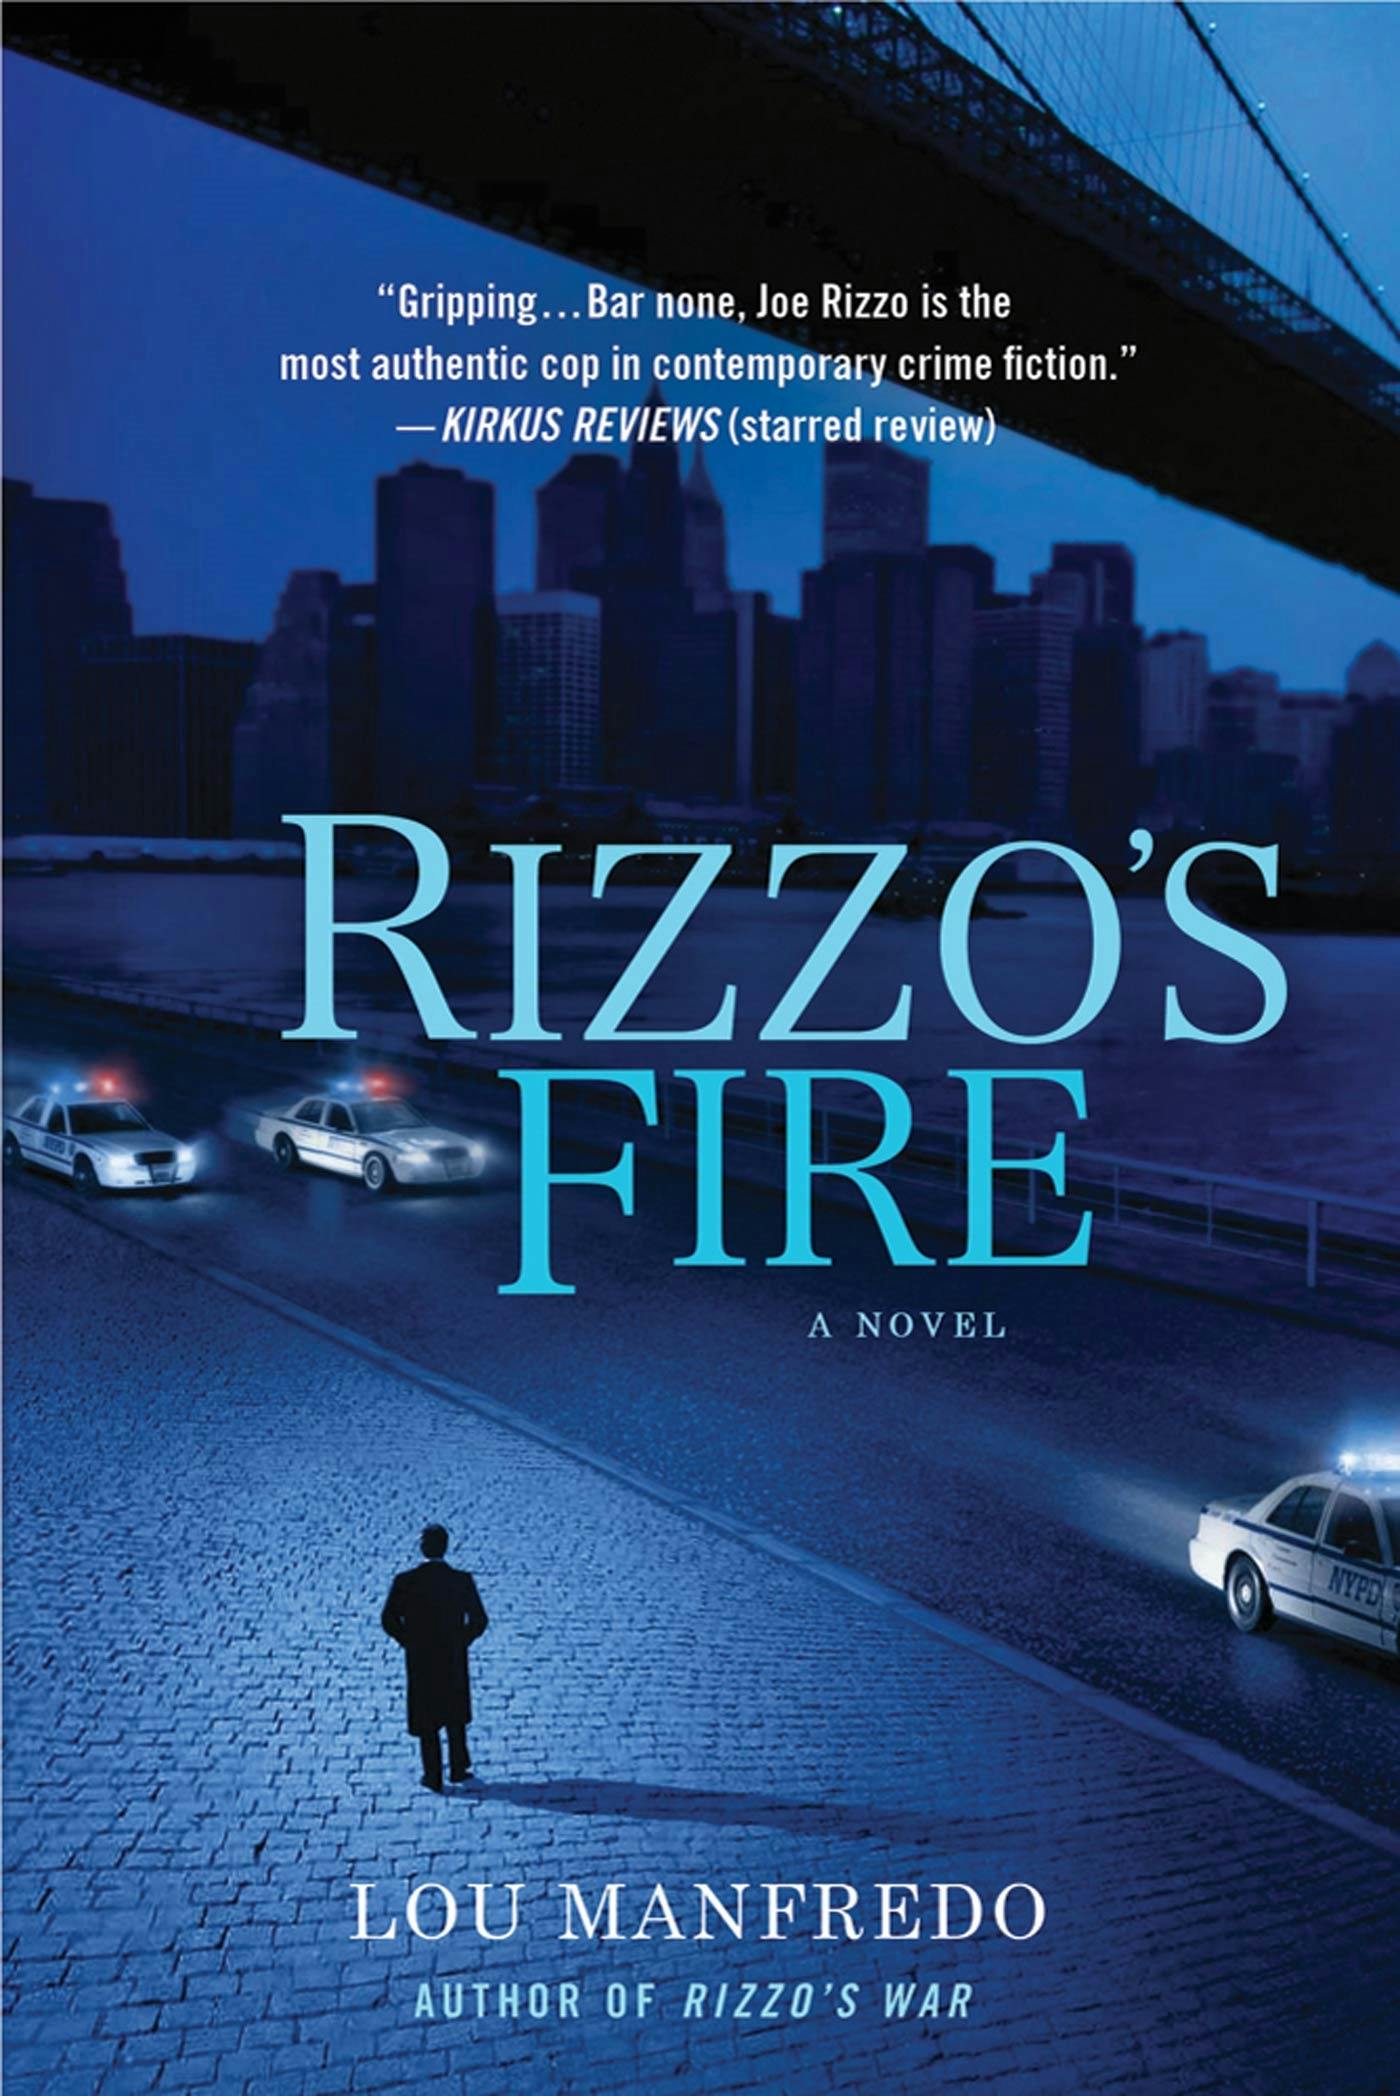 Image of Rizzo's Fire